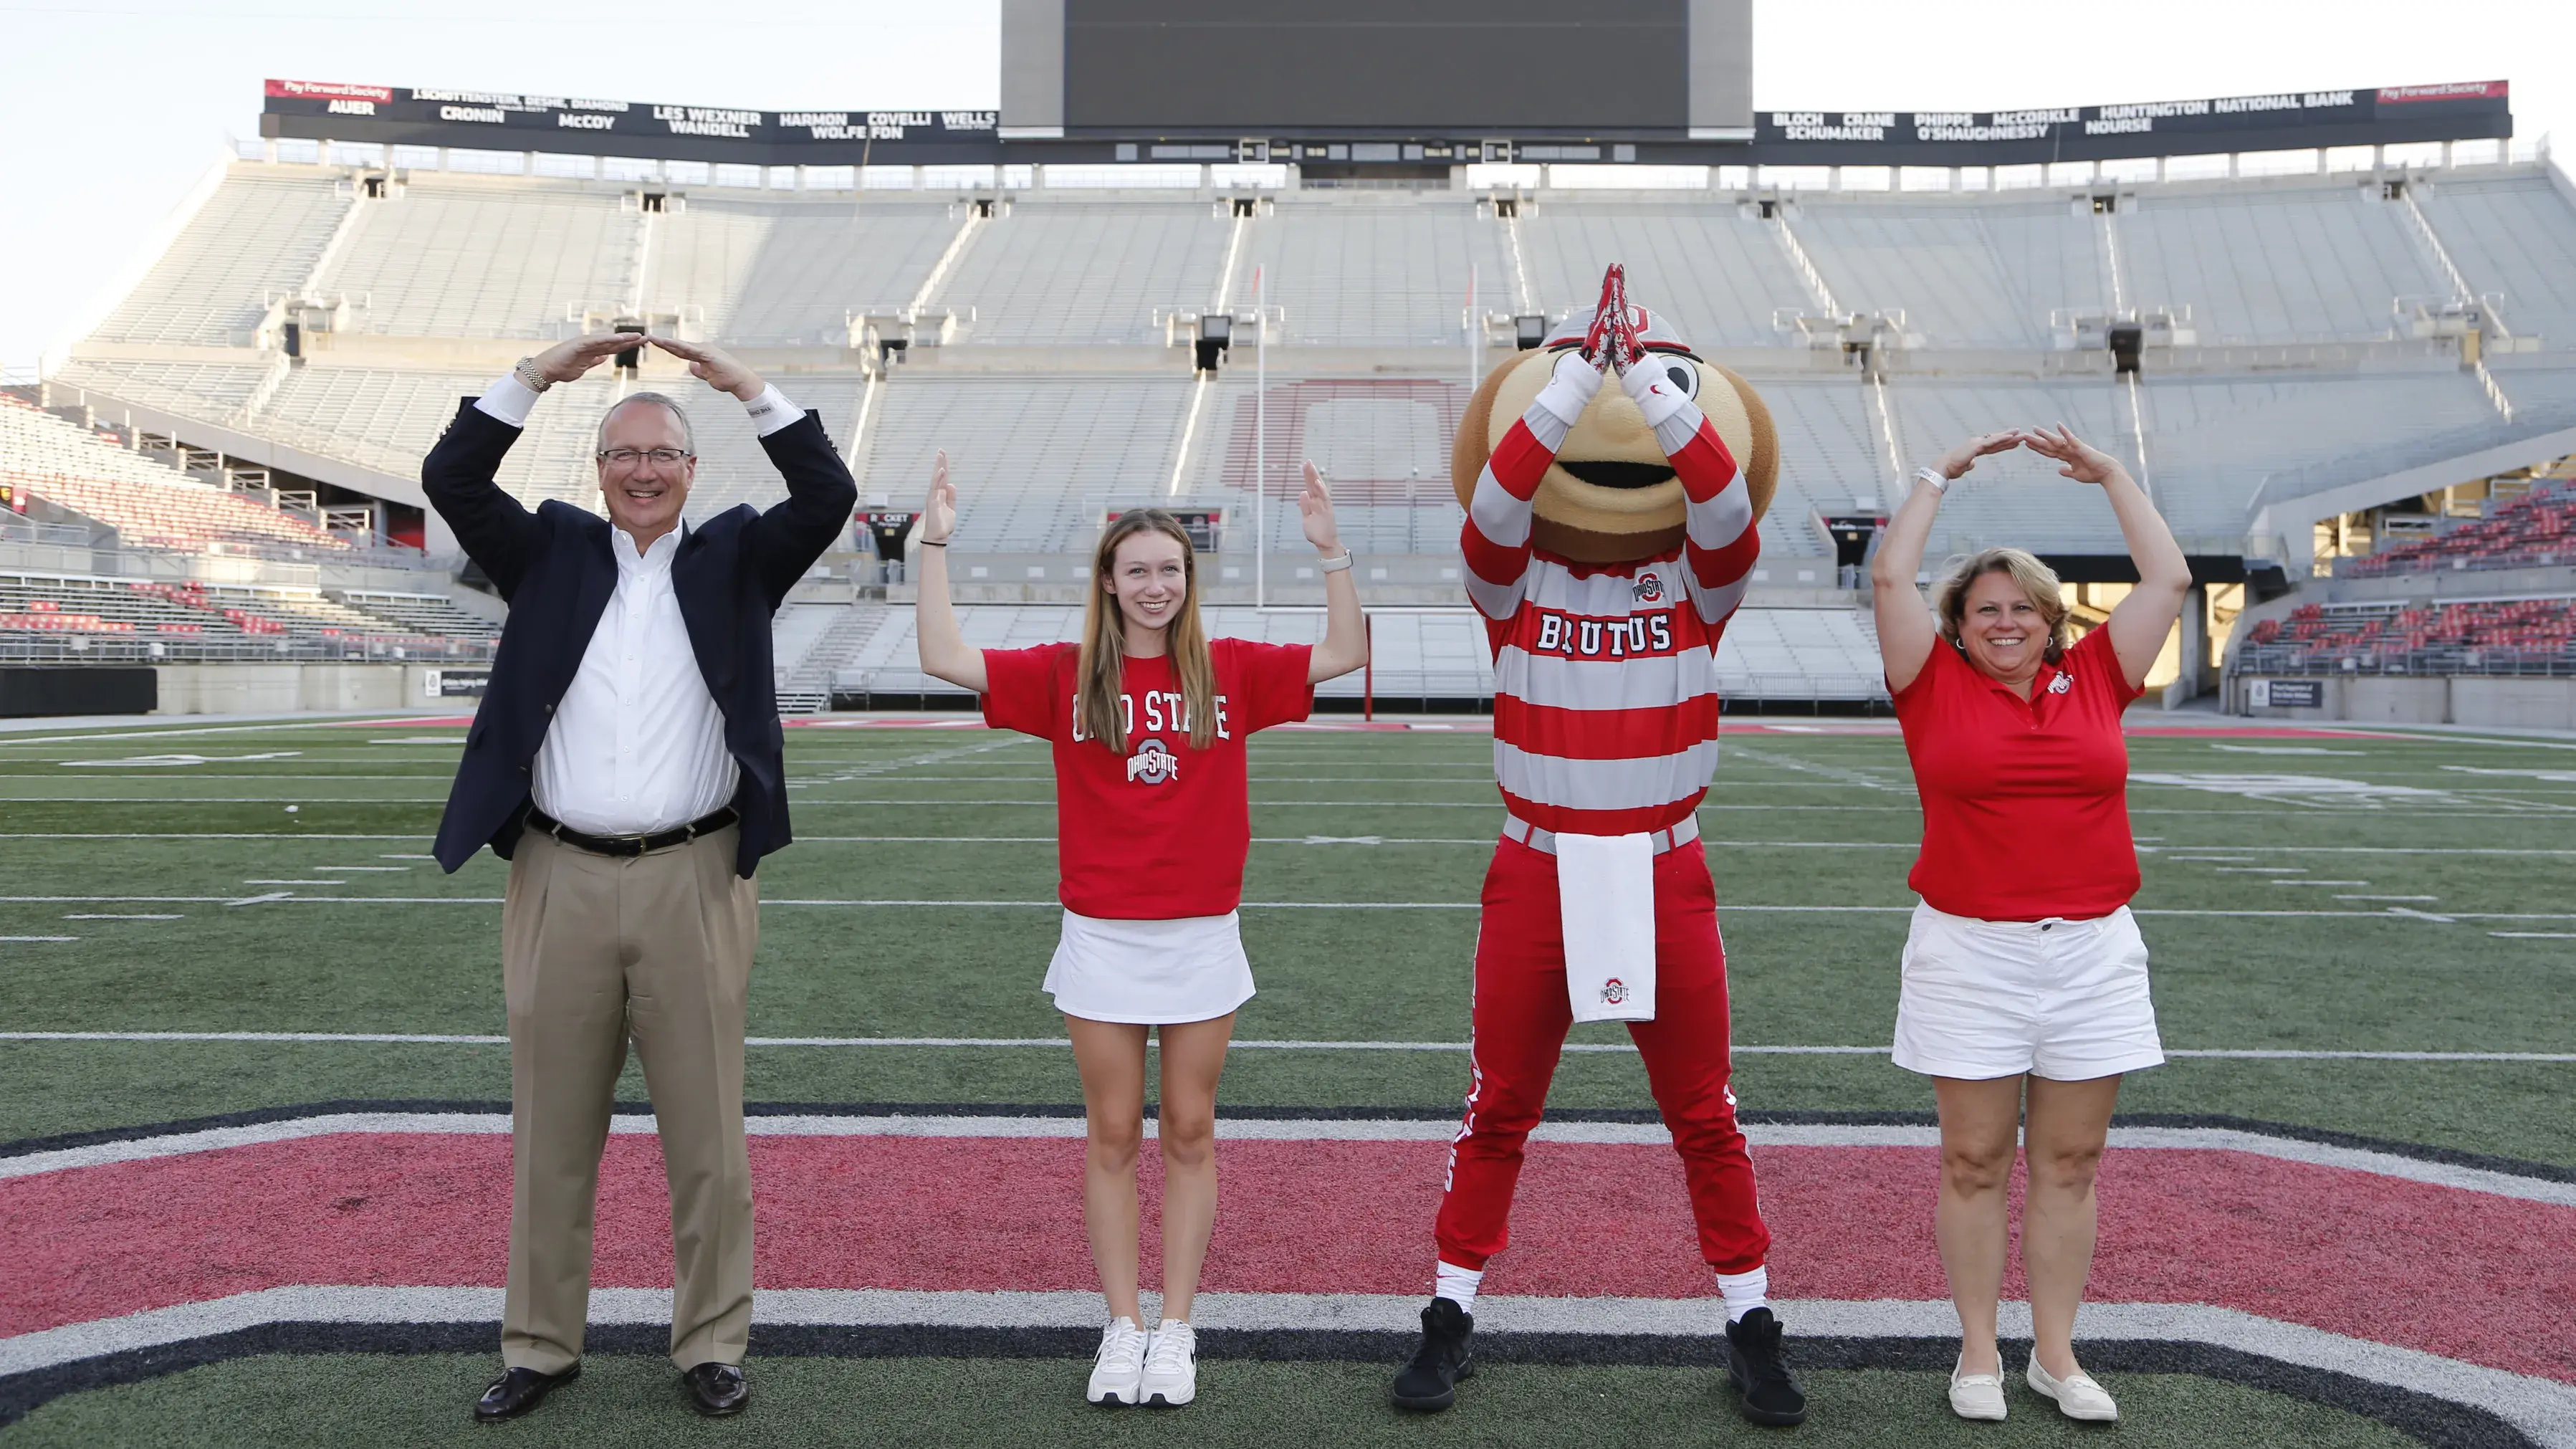 Student and parents recreate O H I O with brutus buckeye on the football field